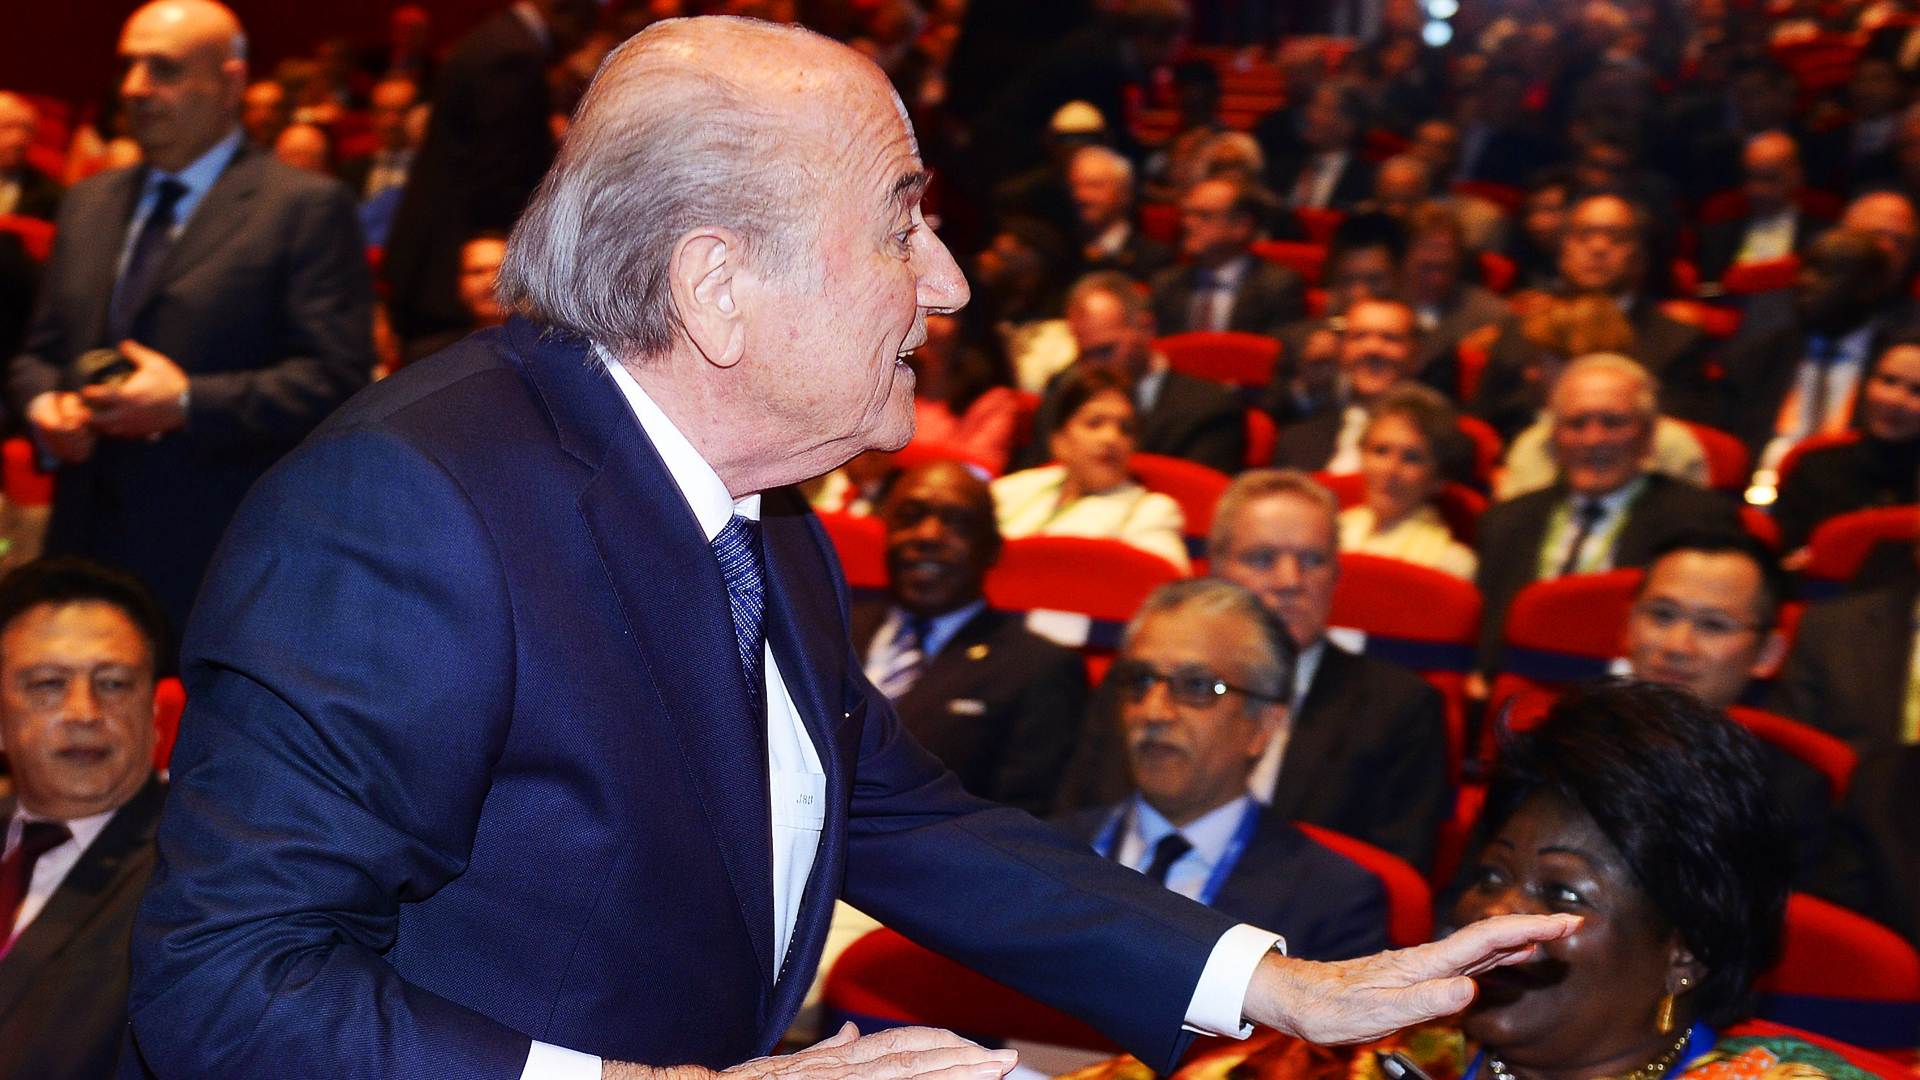 Fifa president Sepp Blatter has a fight on his hands in Zurich. Photo: EPA